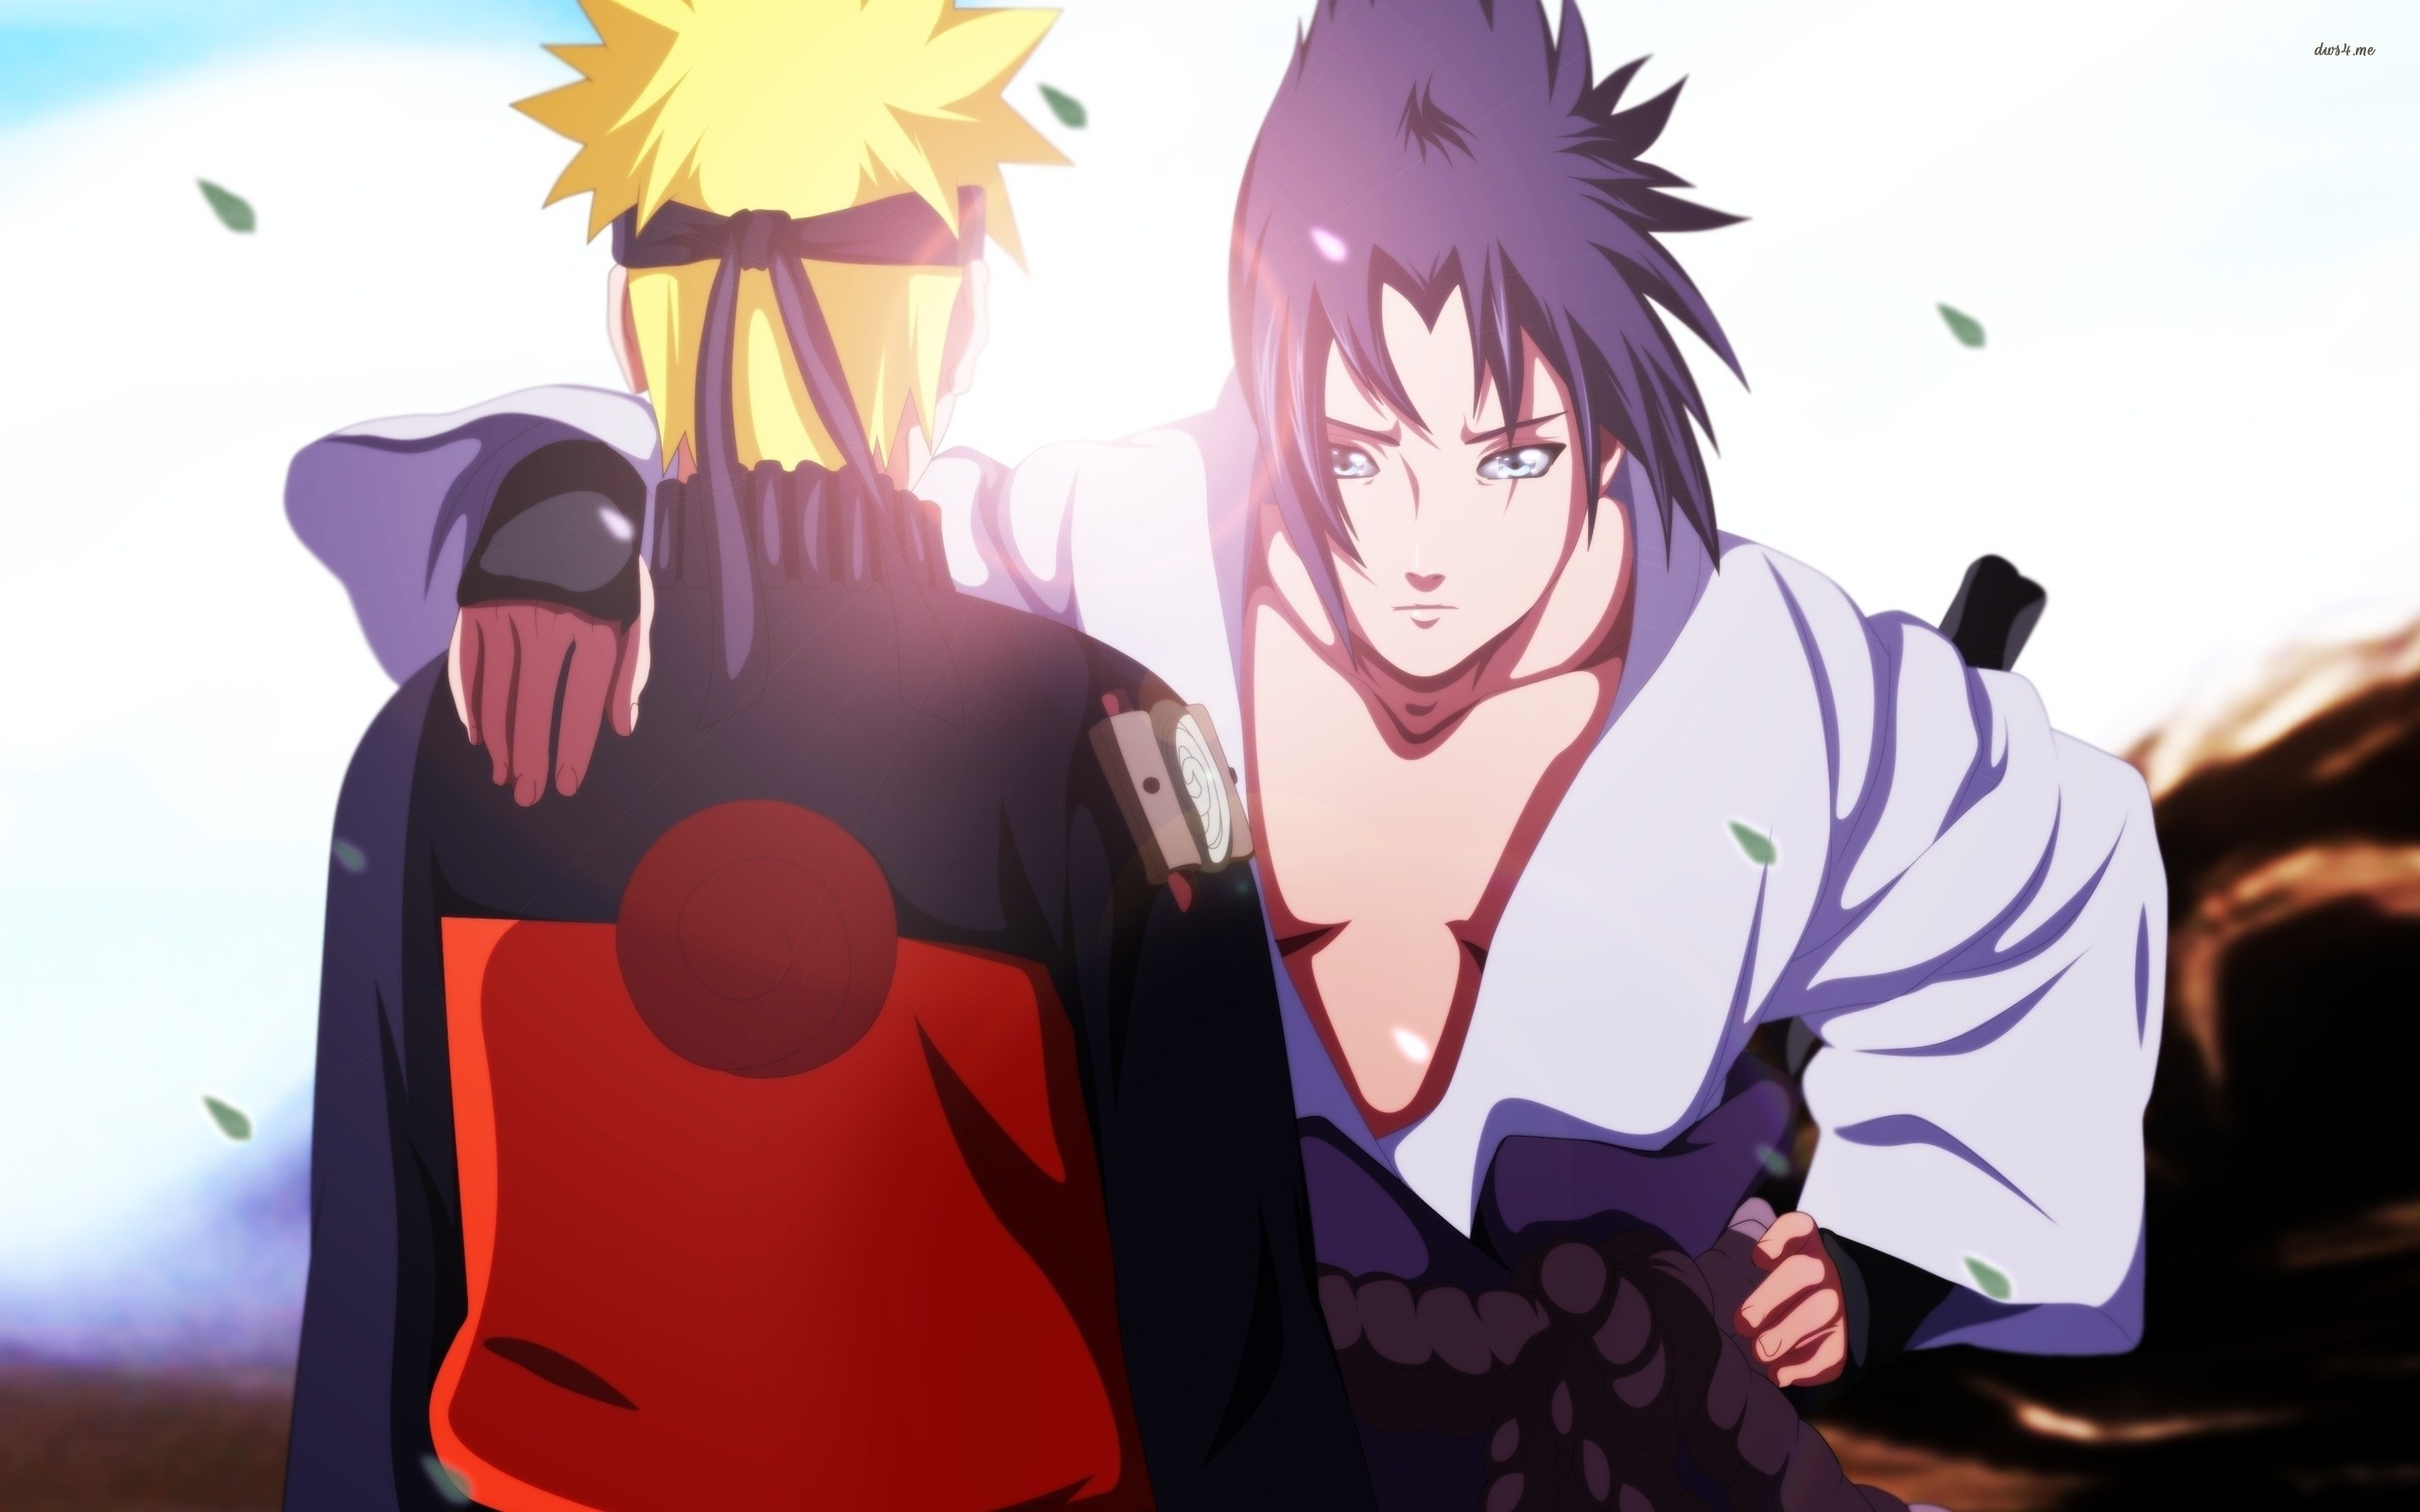 2560x1600 Naruto HD Wallpapers and Backgrounds | HD Wallpapers | Pinterest | Naruto  wallpaper, Wallpaper and Wallpapers android